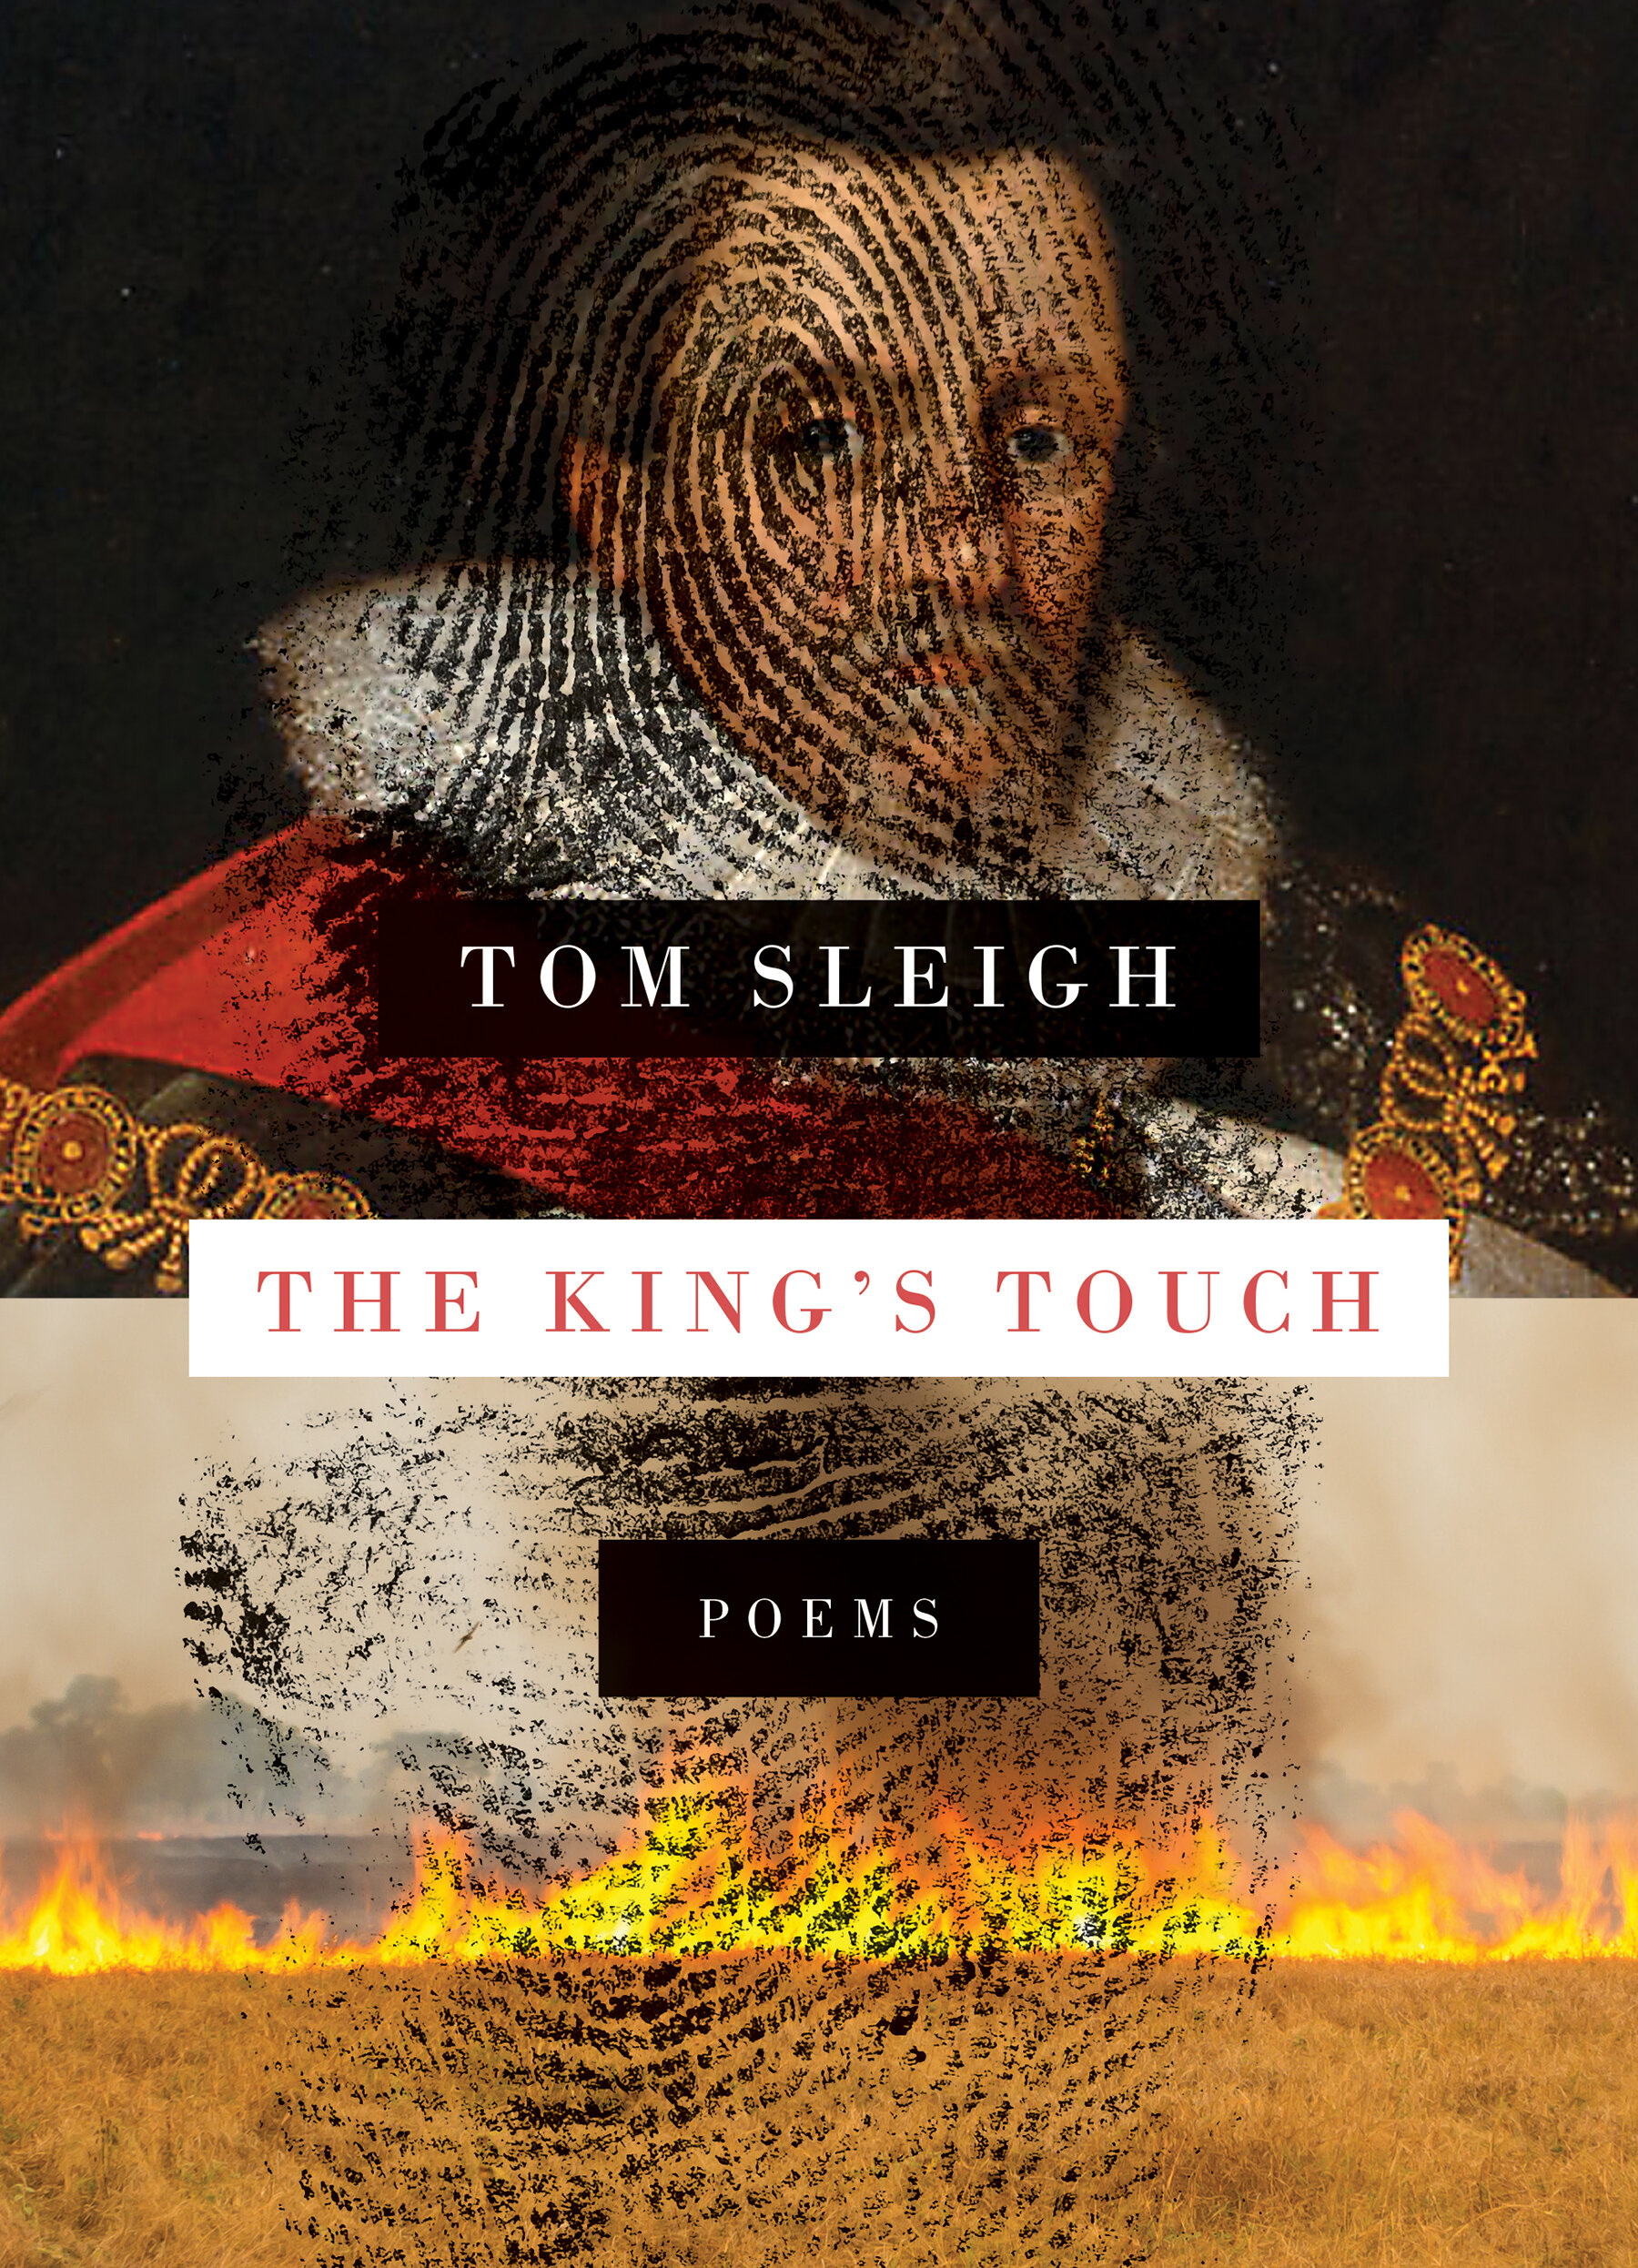 [DELAYED] Book Launch: The King's Touch by Tom Sleigh in conversation with Gabriel Kruis